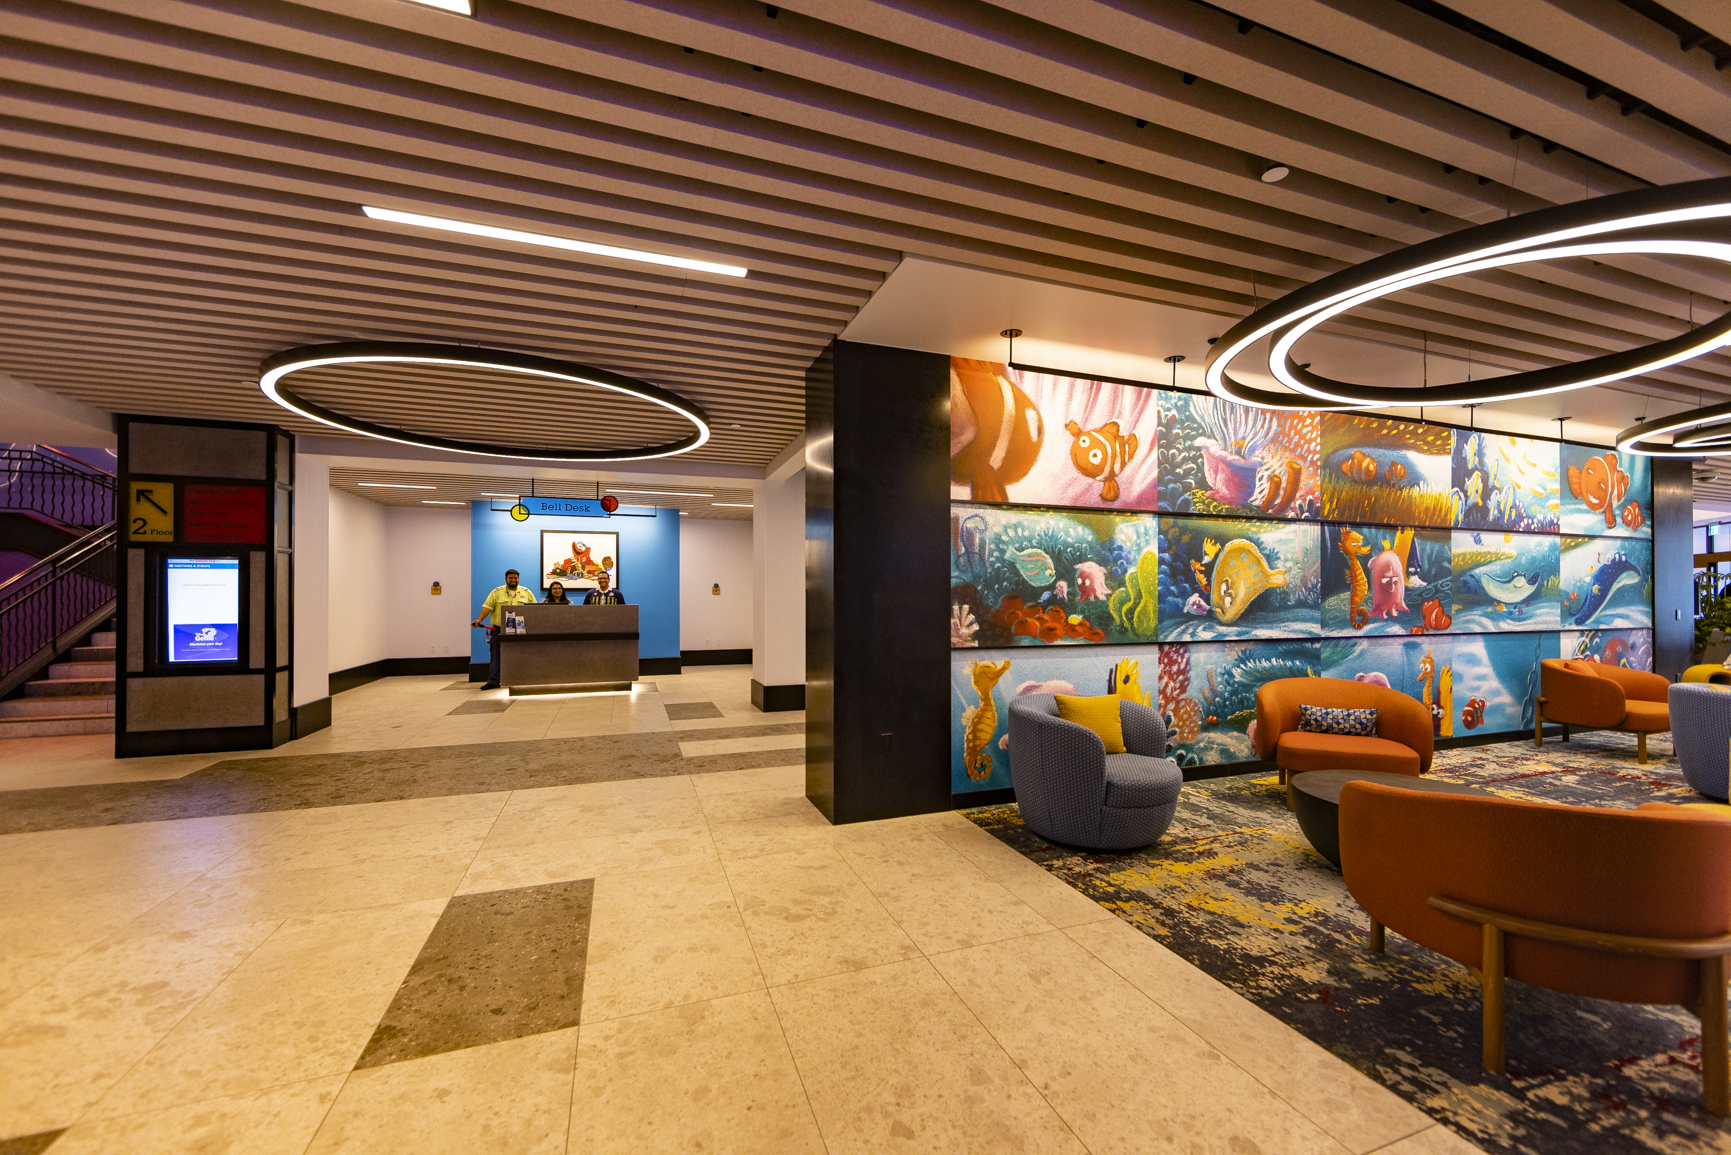 Featuring portraits and maquettes of iconic Pixar characters, the main lobby invites guests to begin their adventure amid a vibrant and colorful blend of different art galleries at Pixar Place Hotel at Disneyland Resort in Anaheim, Calif. (Christian Thompson/Disneyland Resort)